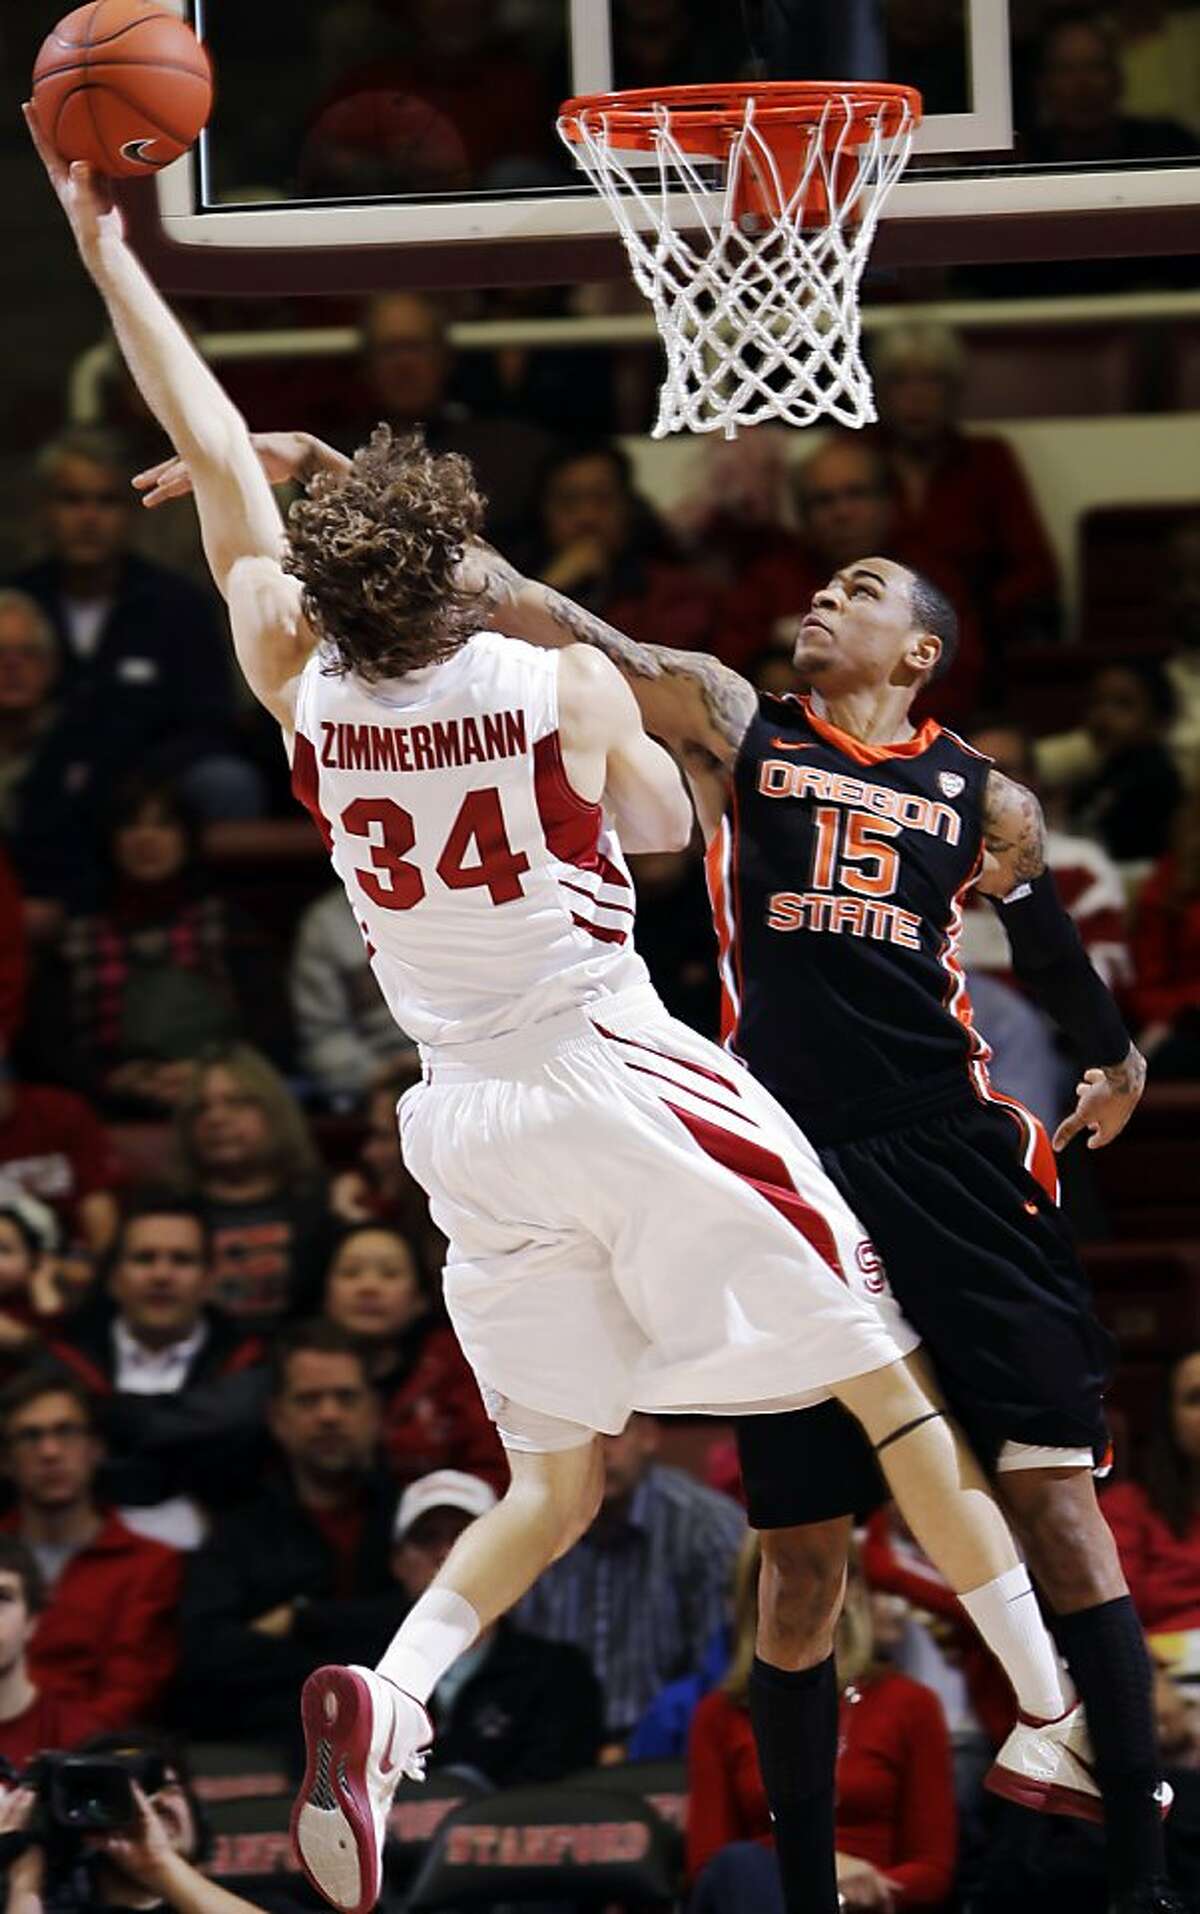 Oregon State forward Eric Moreland (15) blocks a shot by Stanford forward Andrew Zimmermann (34) during the second half of an NCAA college basketball game in Stanford, Calif., Thursday, Feb. 16, 2012.